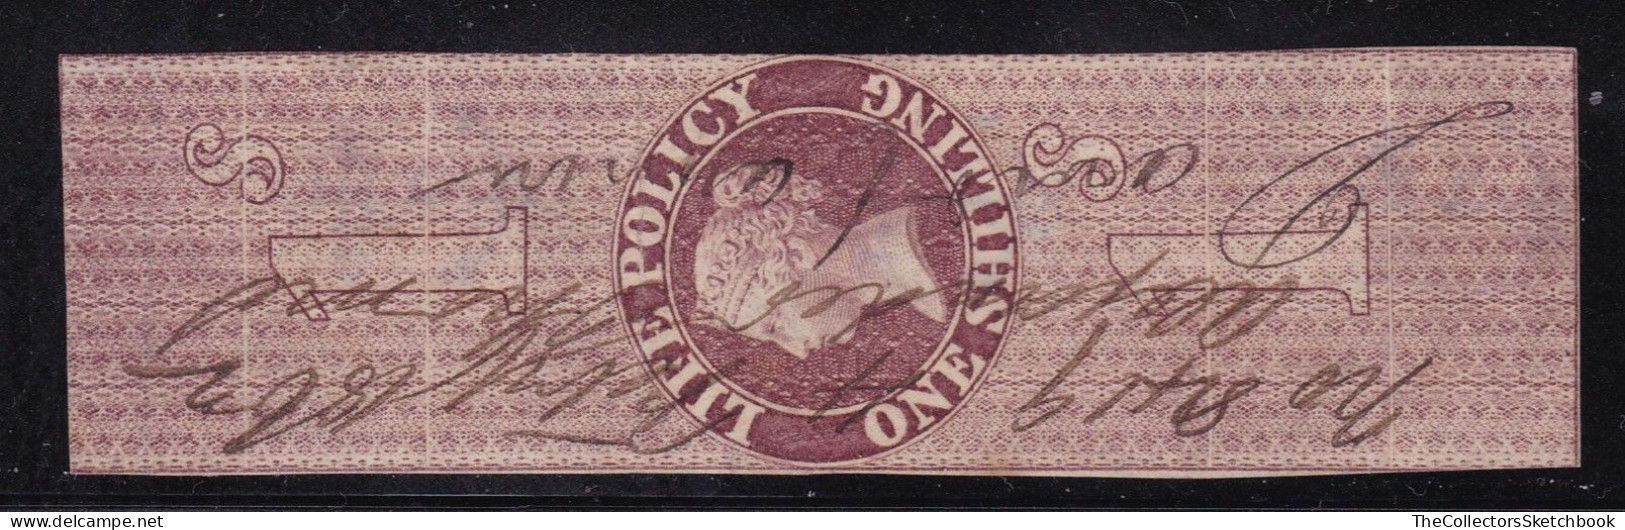 GB Fiscals / Revenues Life Policy 1/- -  Red - Brown Barefoot 3  ,good Used . - Steuermarken